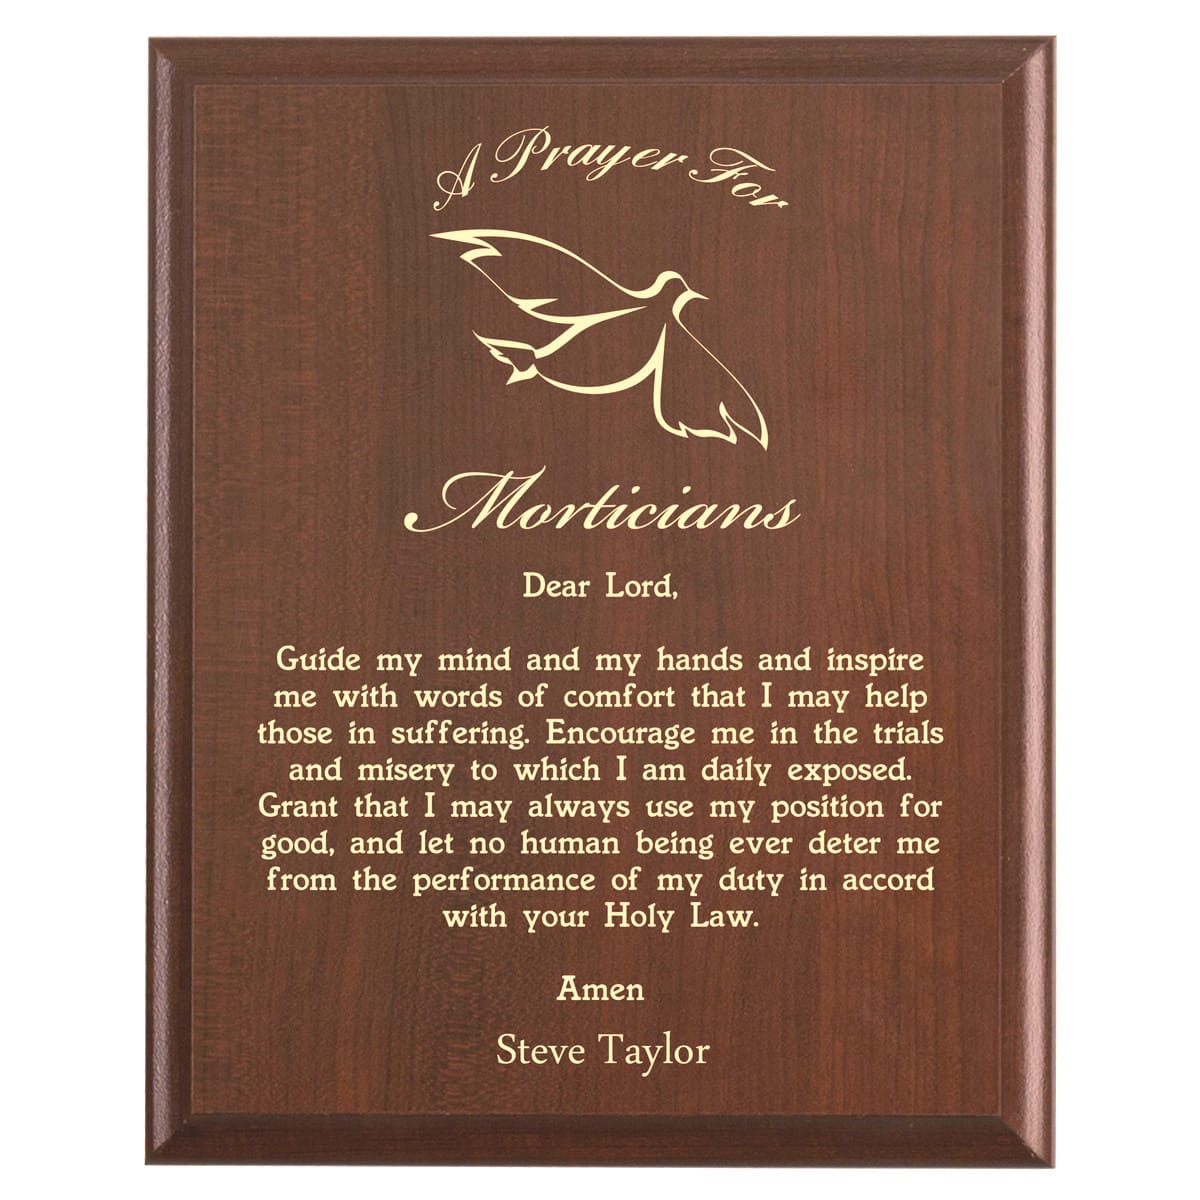 Plaque photo: Morticians Prayer Plaque design with free personalization. Wood style finish with customized text.